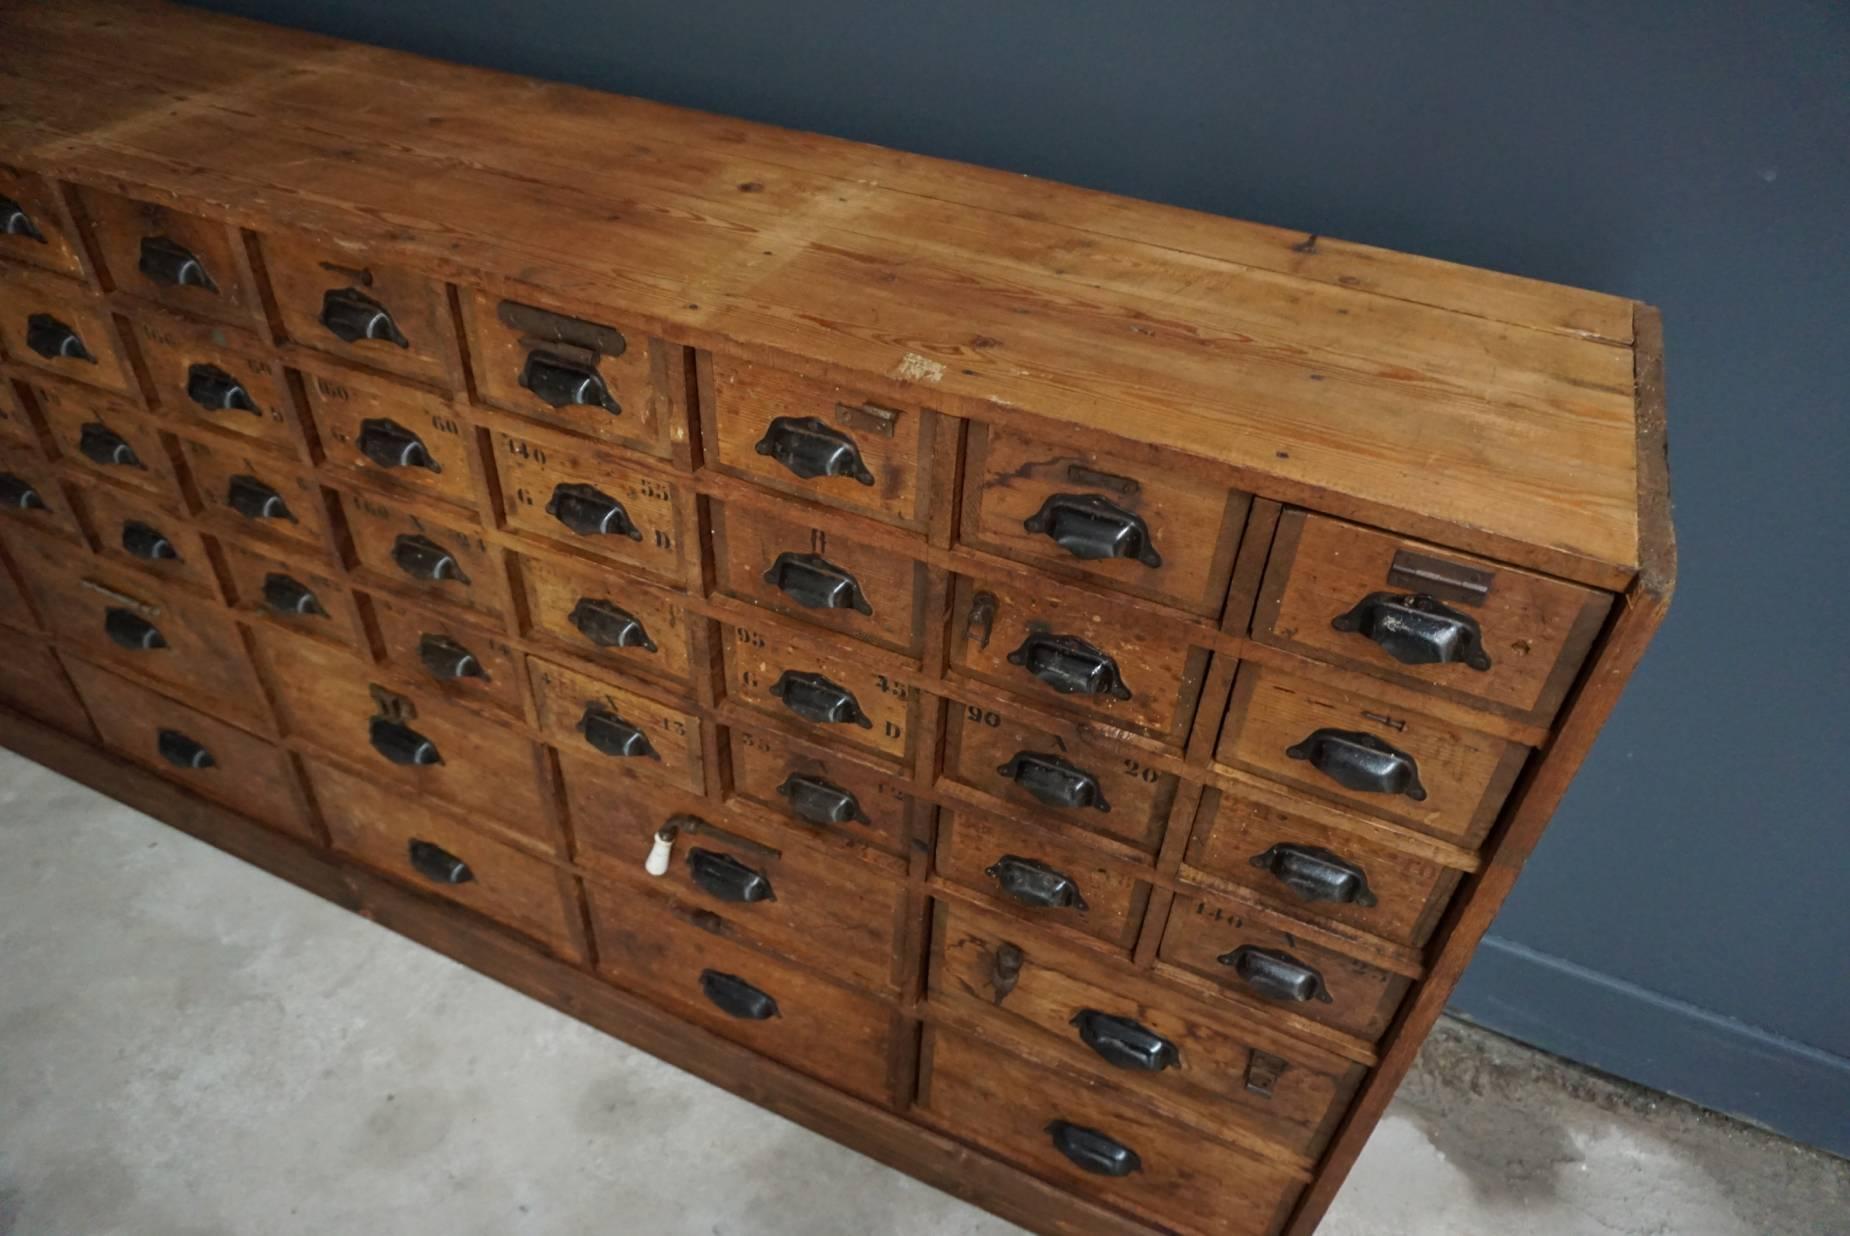 This apothecary bank of drawers was designed and made circa 1920s-1930s in France. The piece is made from oak with metal handles. It was used in a hardware store.